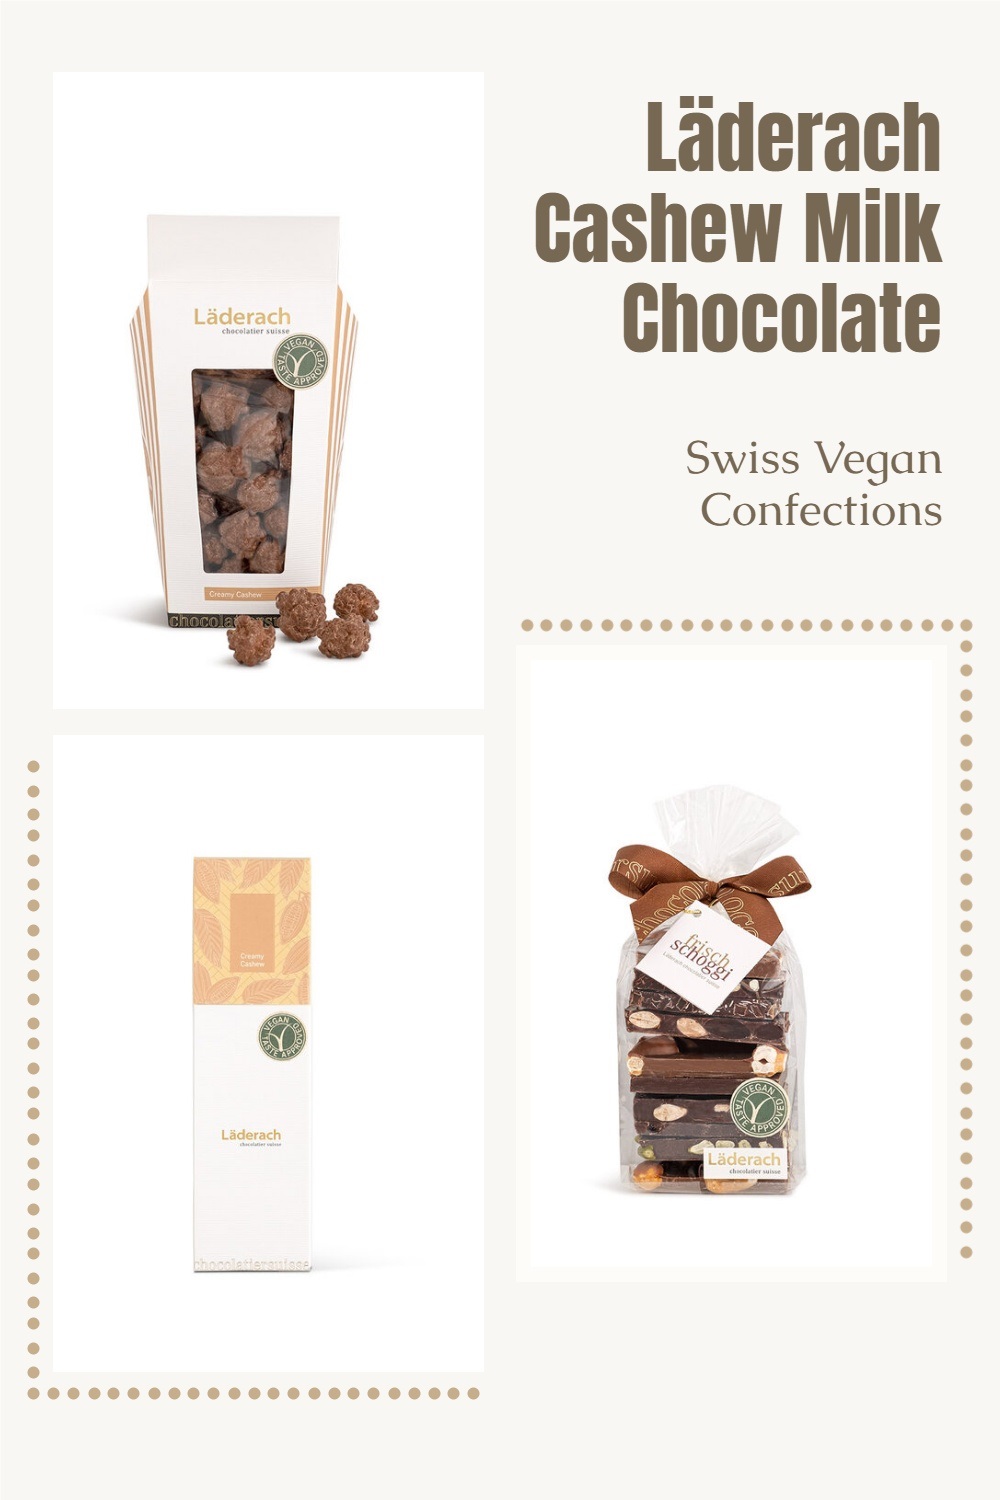 Läderach Vegan Milk Chocolate Reviews and Info - A range of dairy-free, plant-based, cashew milk chocolate products from a famous Swiss Chocolatier